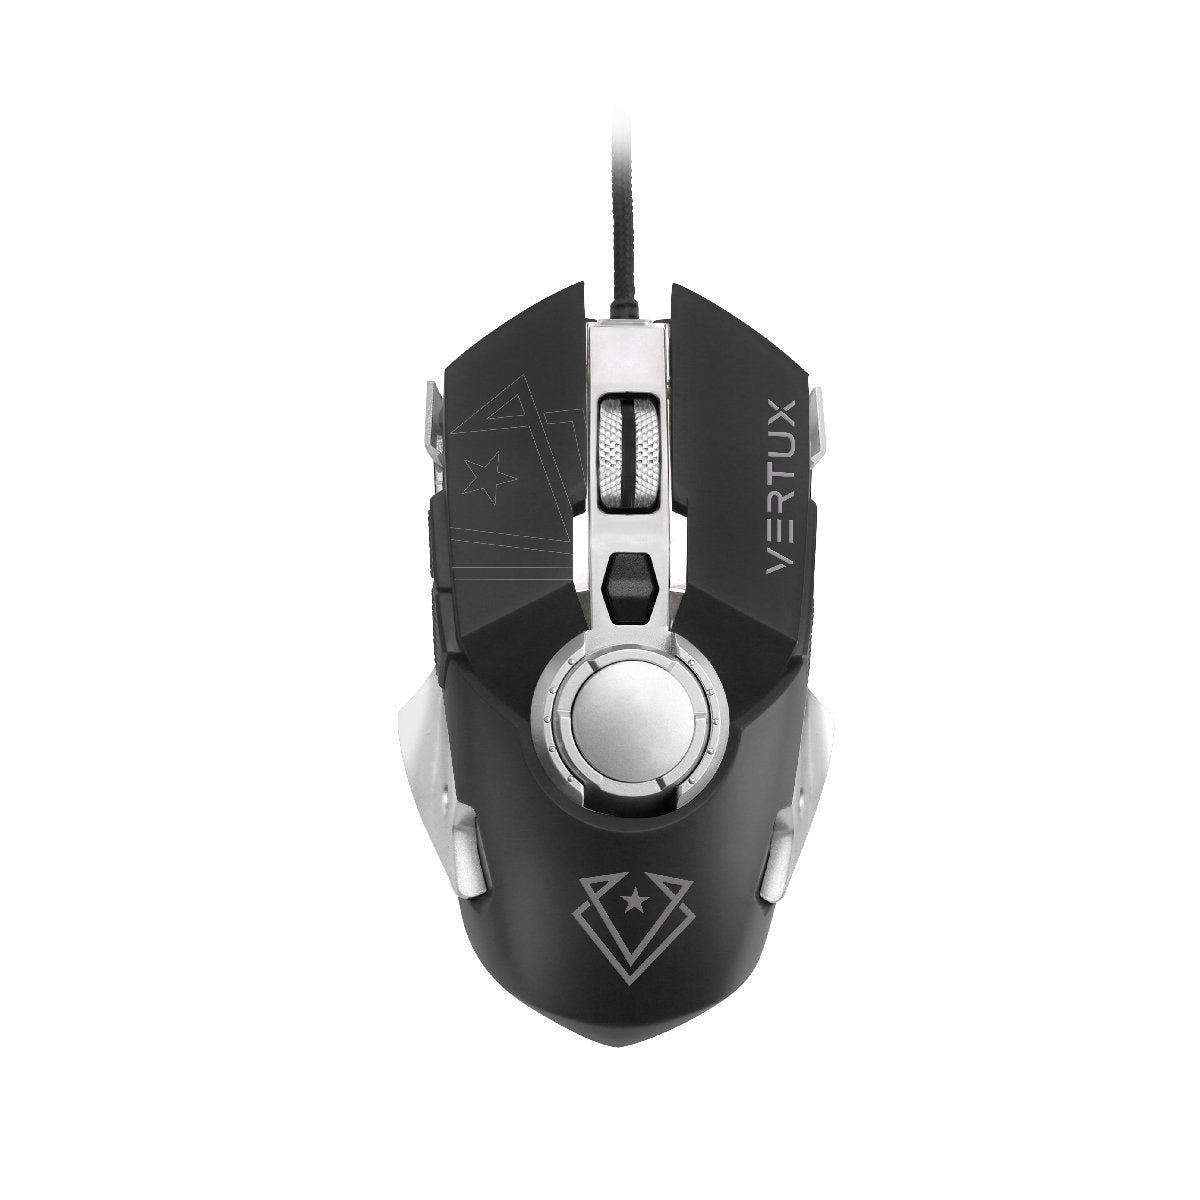 Vertux Cobalt High Accurancy Wired Gaming Mouse - Black/Silver - Store 974 | ستور ٩٧٤